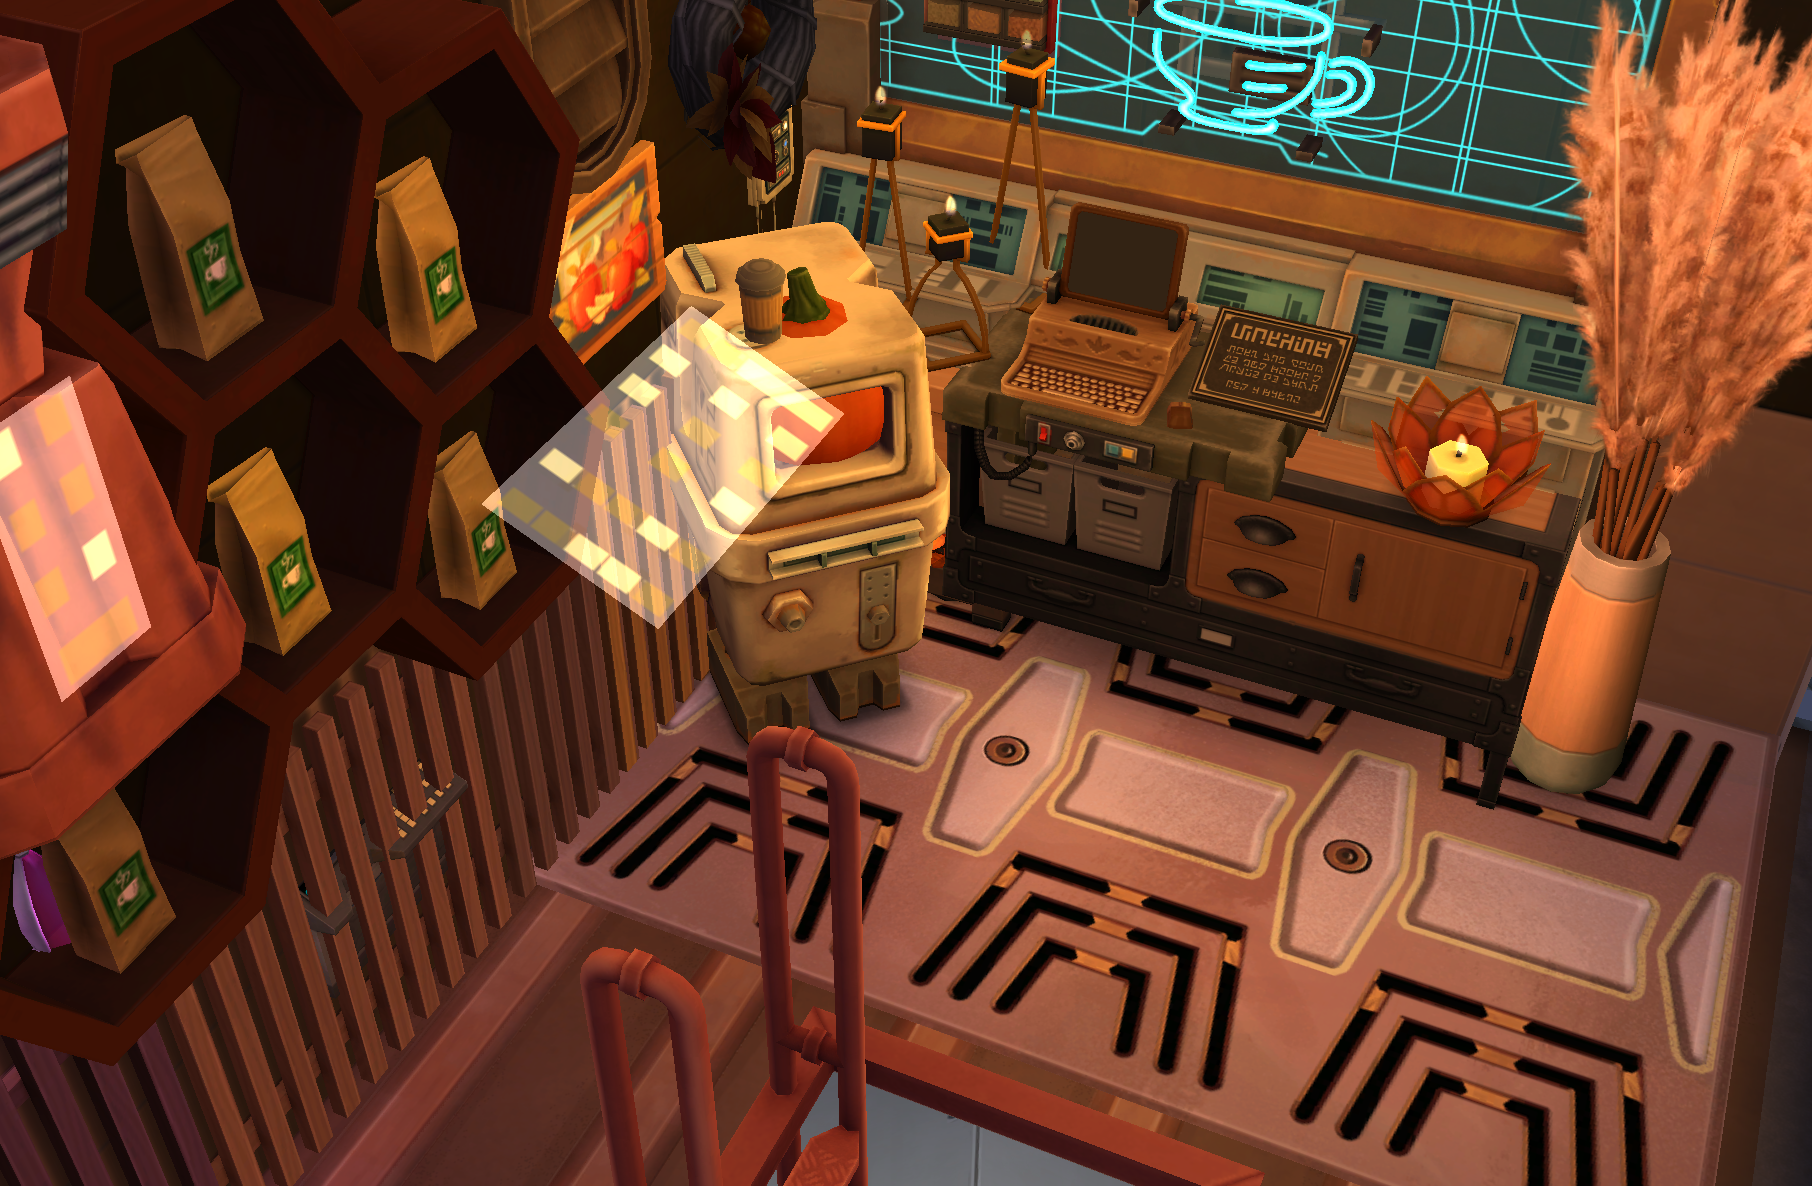 A rendered image from the Vestibule (Room 001) of my Pumpkin Spice Launch Arcology